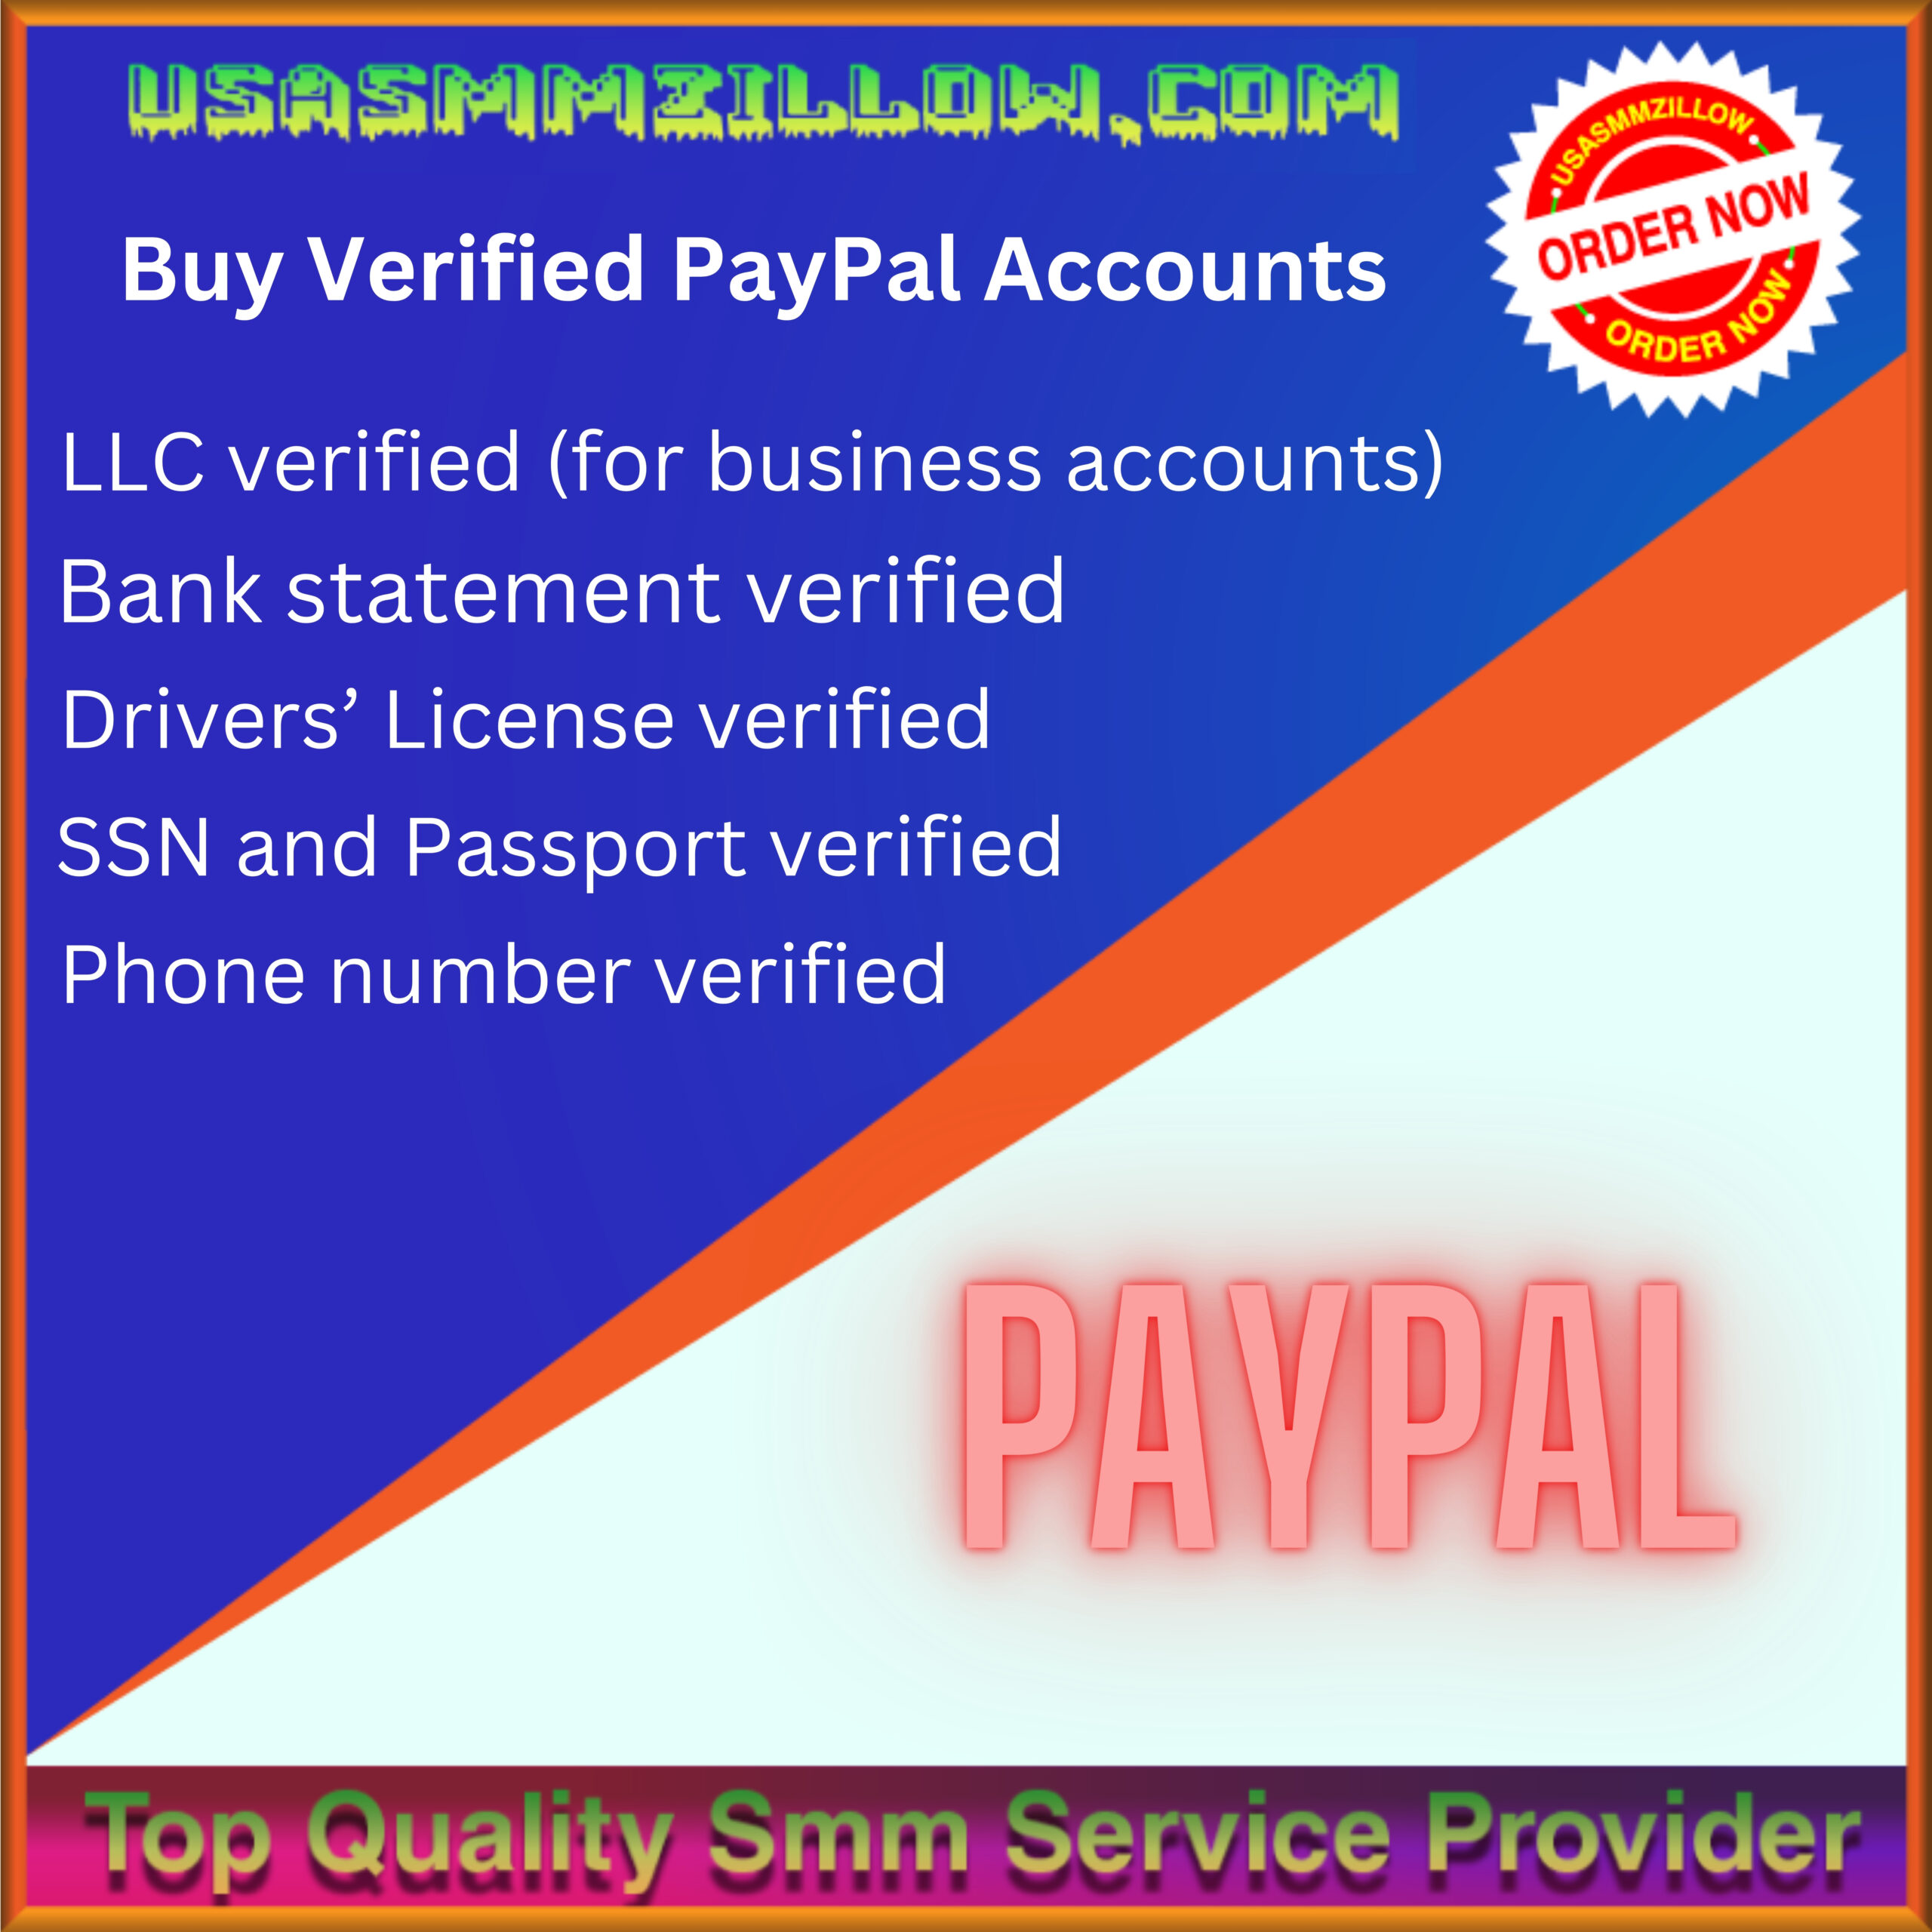 Buy Verified PayPal Accounts - LESTER Lg) fg] Jeg SLBNLBNLI Ld PRL Eg)
Buy Verified PayPal Accounts

 

LLC verified (for business accounts)
Bank statement verified
Drivers’ License verified

SSN and Passport verified
Phone number verified

  
    

AR SAR Ale LLL ARS ALLIES AZ I ALA BE A A AAA